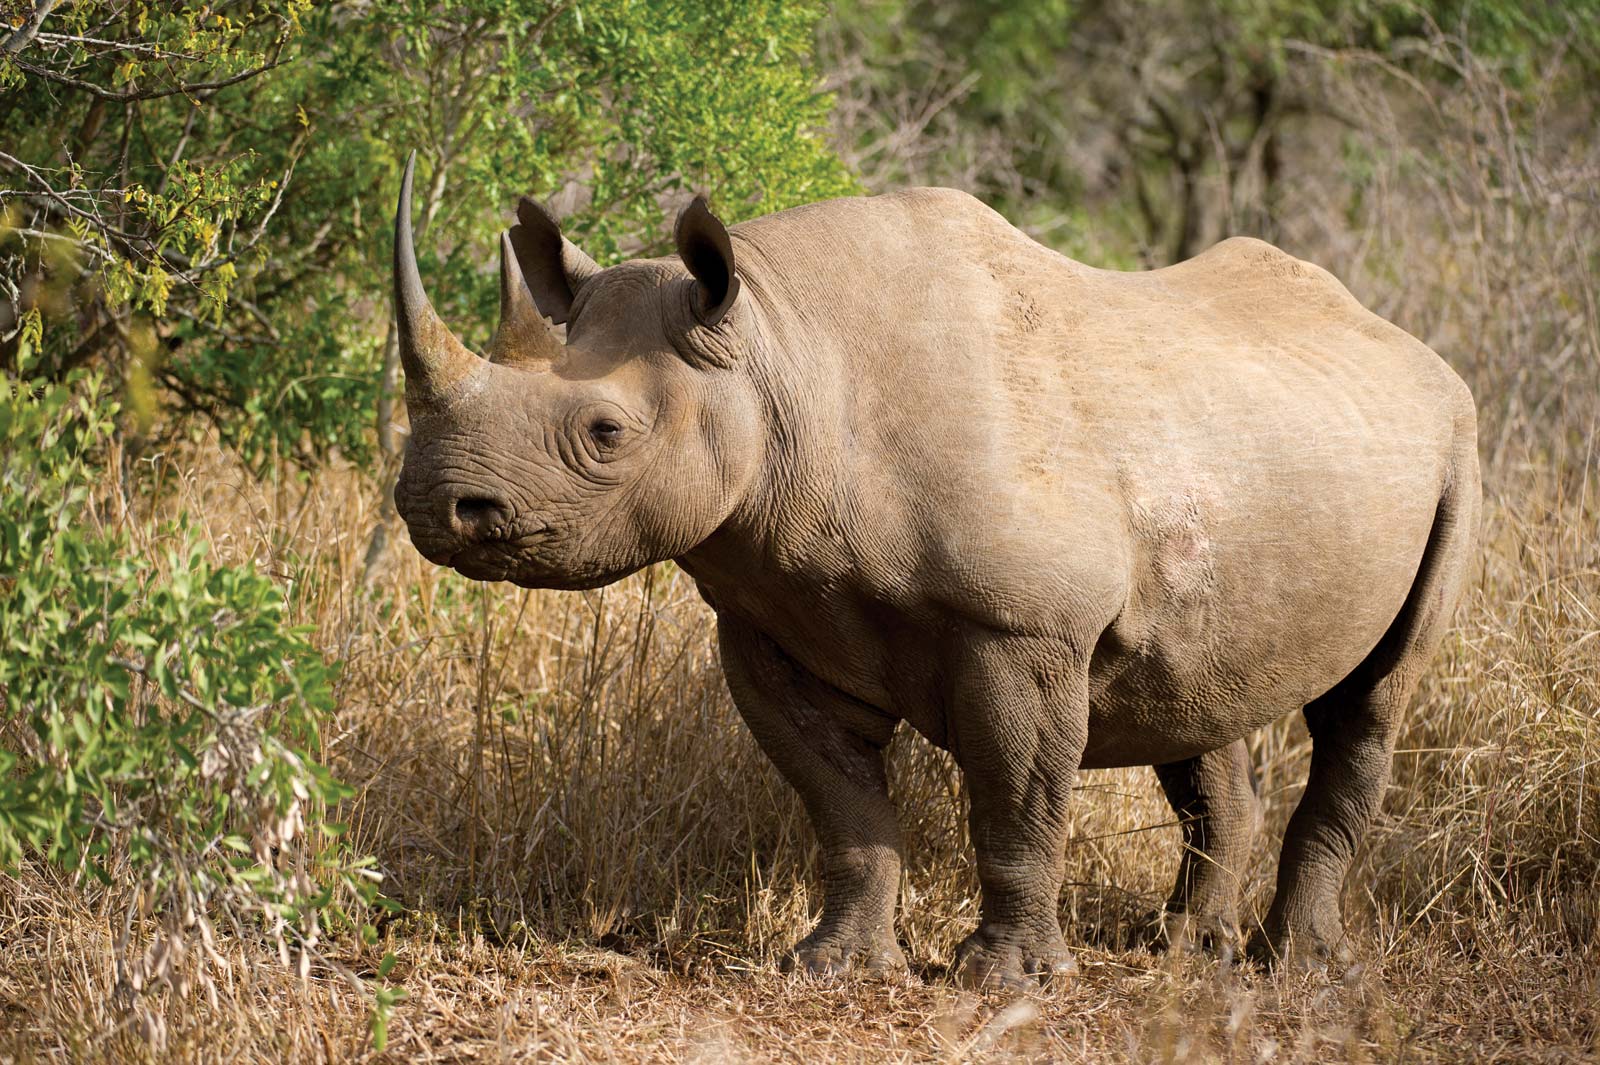 🦒 I Bet You Can’t Spell the Names of 10/20 of These Common Animals West African Black Rhinoceros